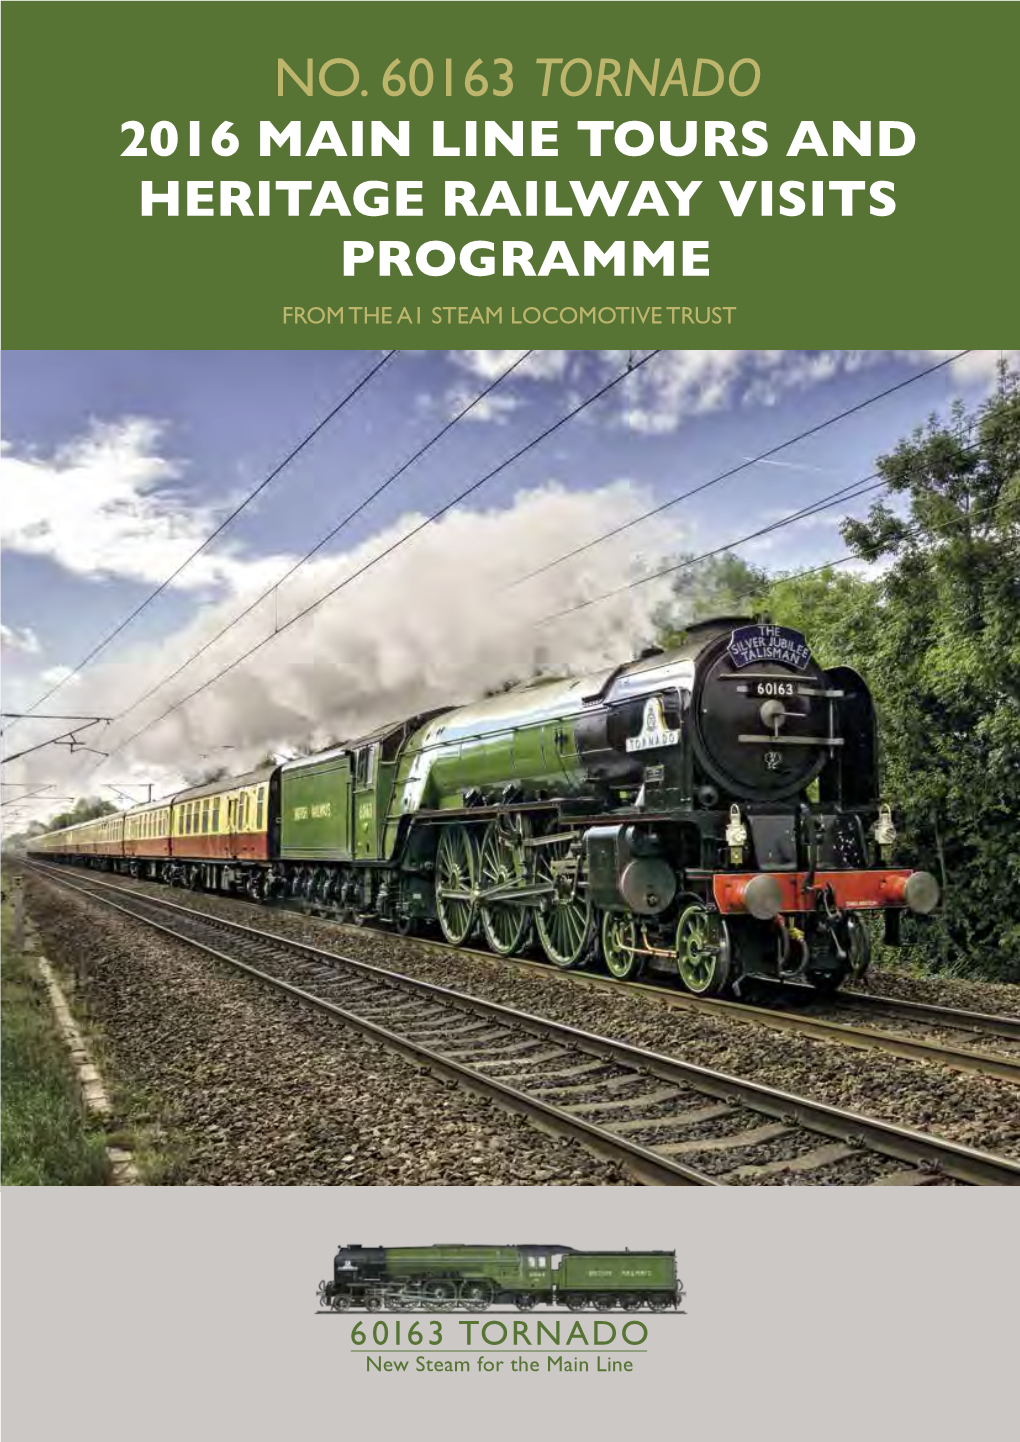 No. 60163 Tornado 2016 Main Line Tours and Heritage Railway Visits Programme from the A1 Steam Locomotive Trust